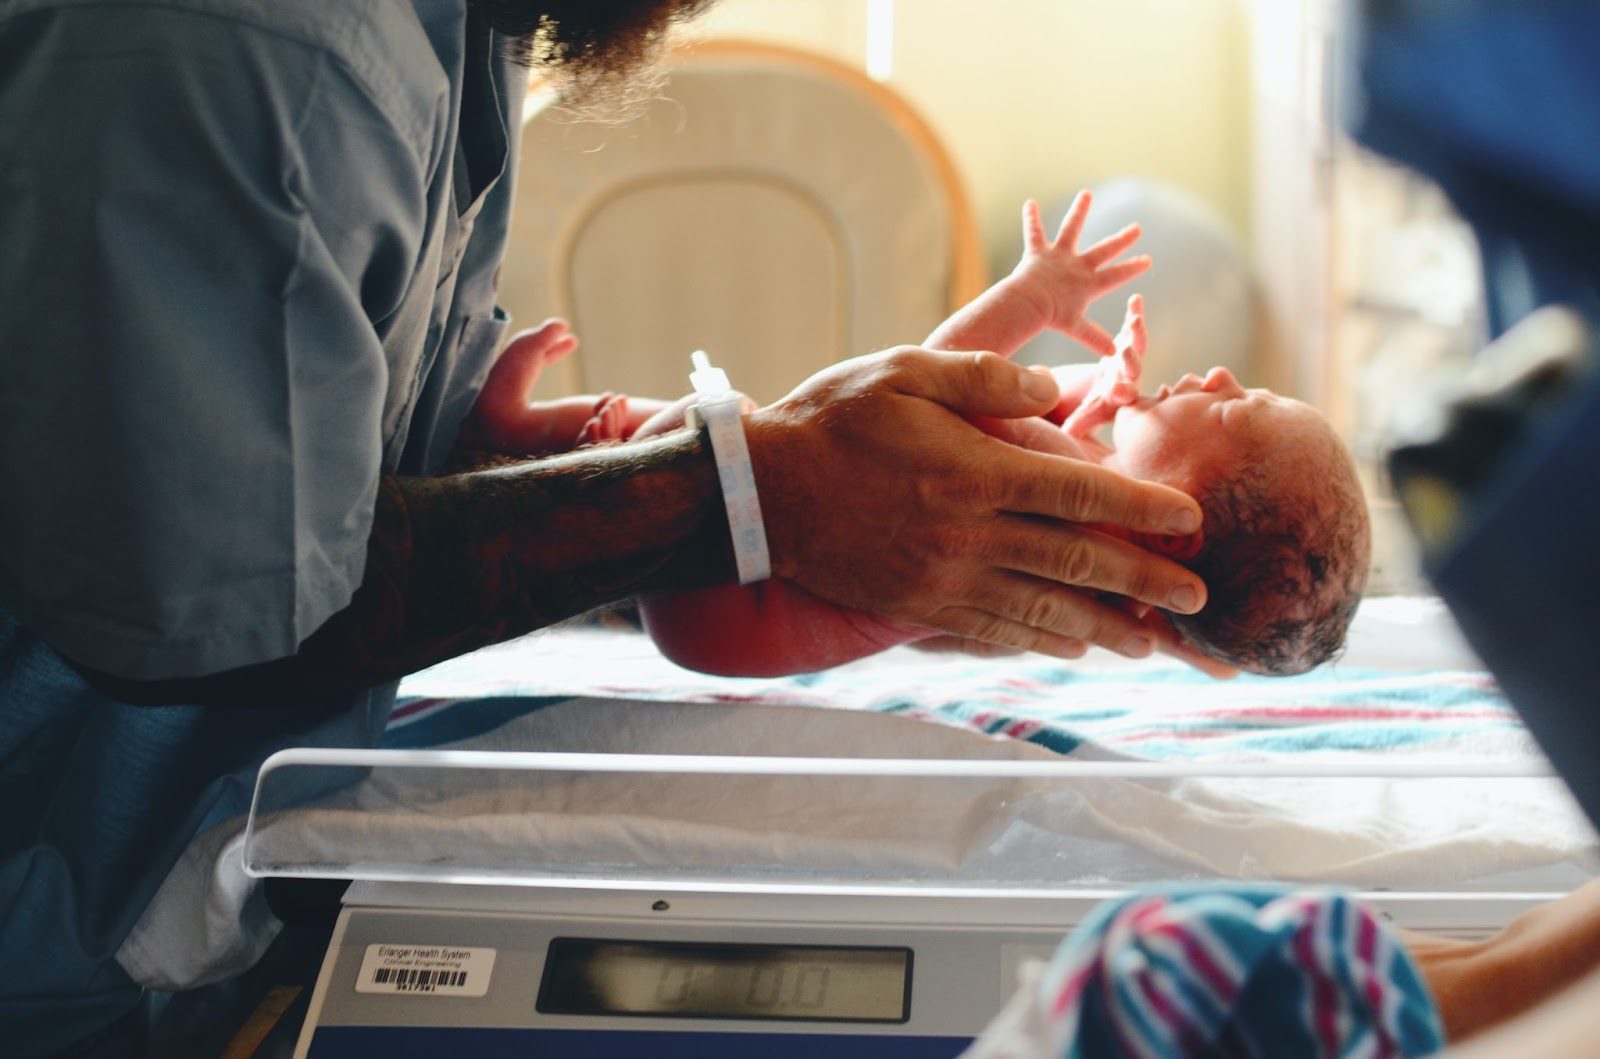 Newborn baby is held over a scale in the hands of a man with a tattooed arm and blue hospital scrubs.